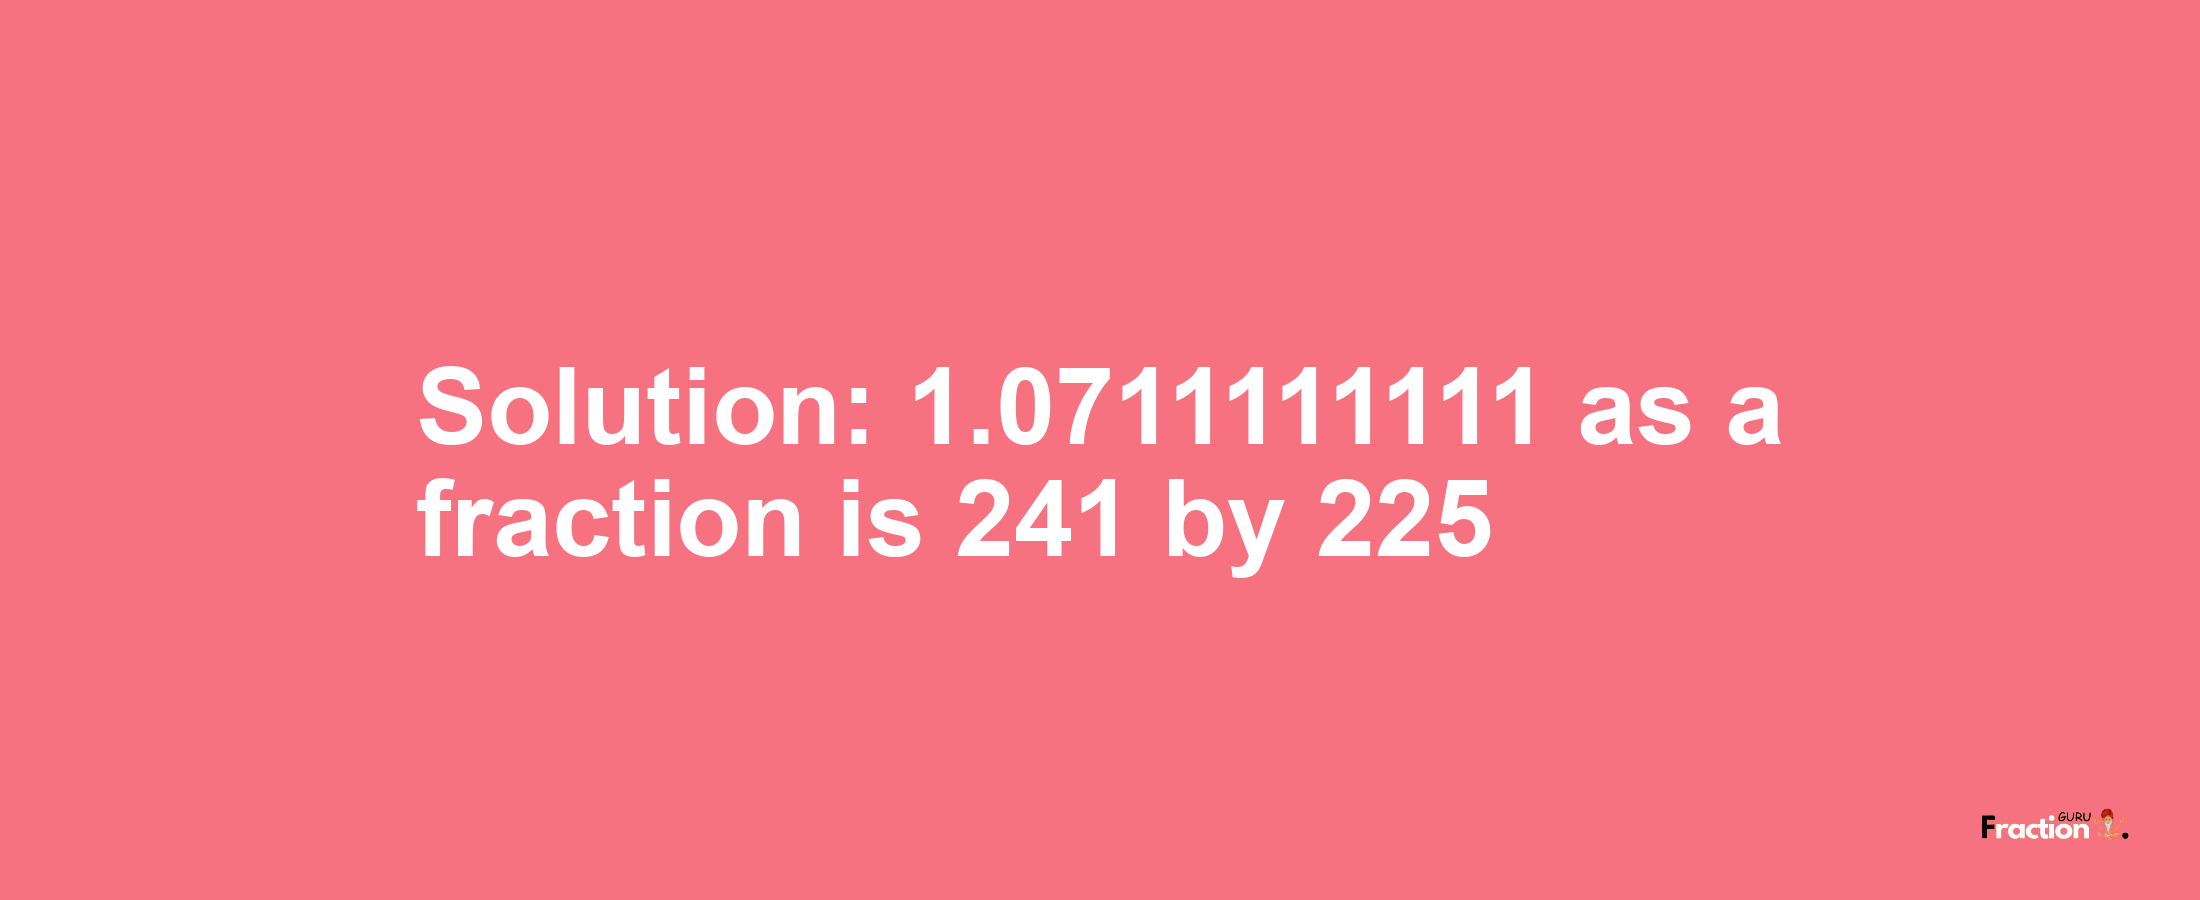 Solution:1.0711111111 as a fraction is 241/225